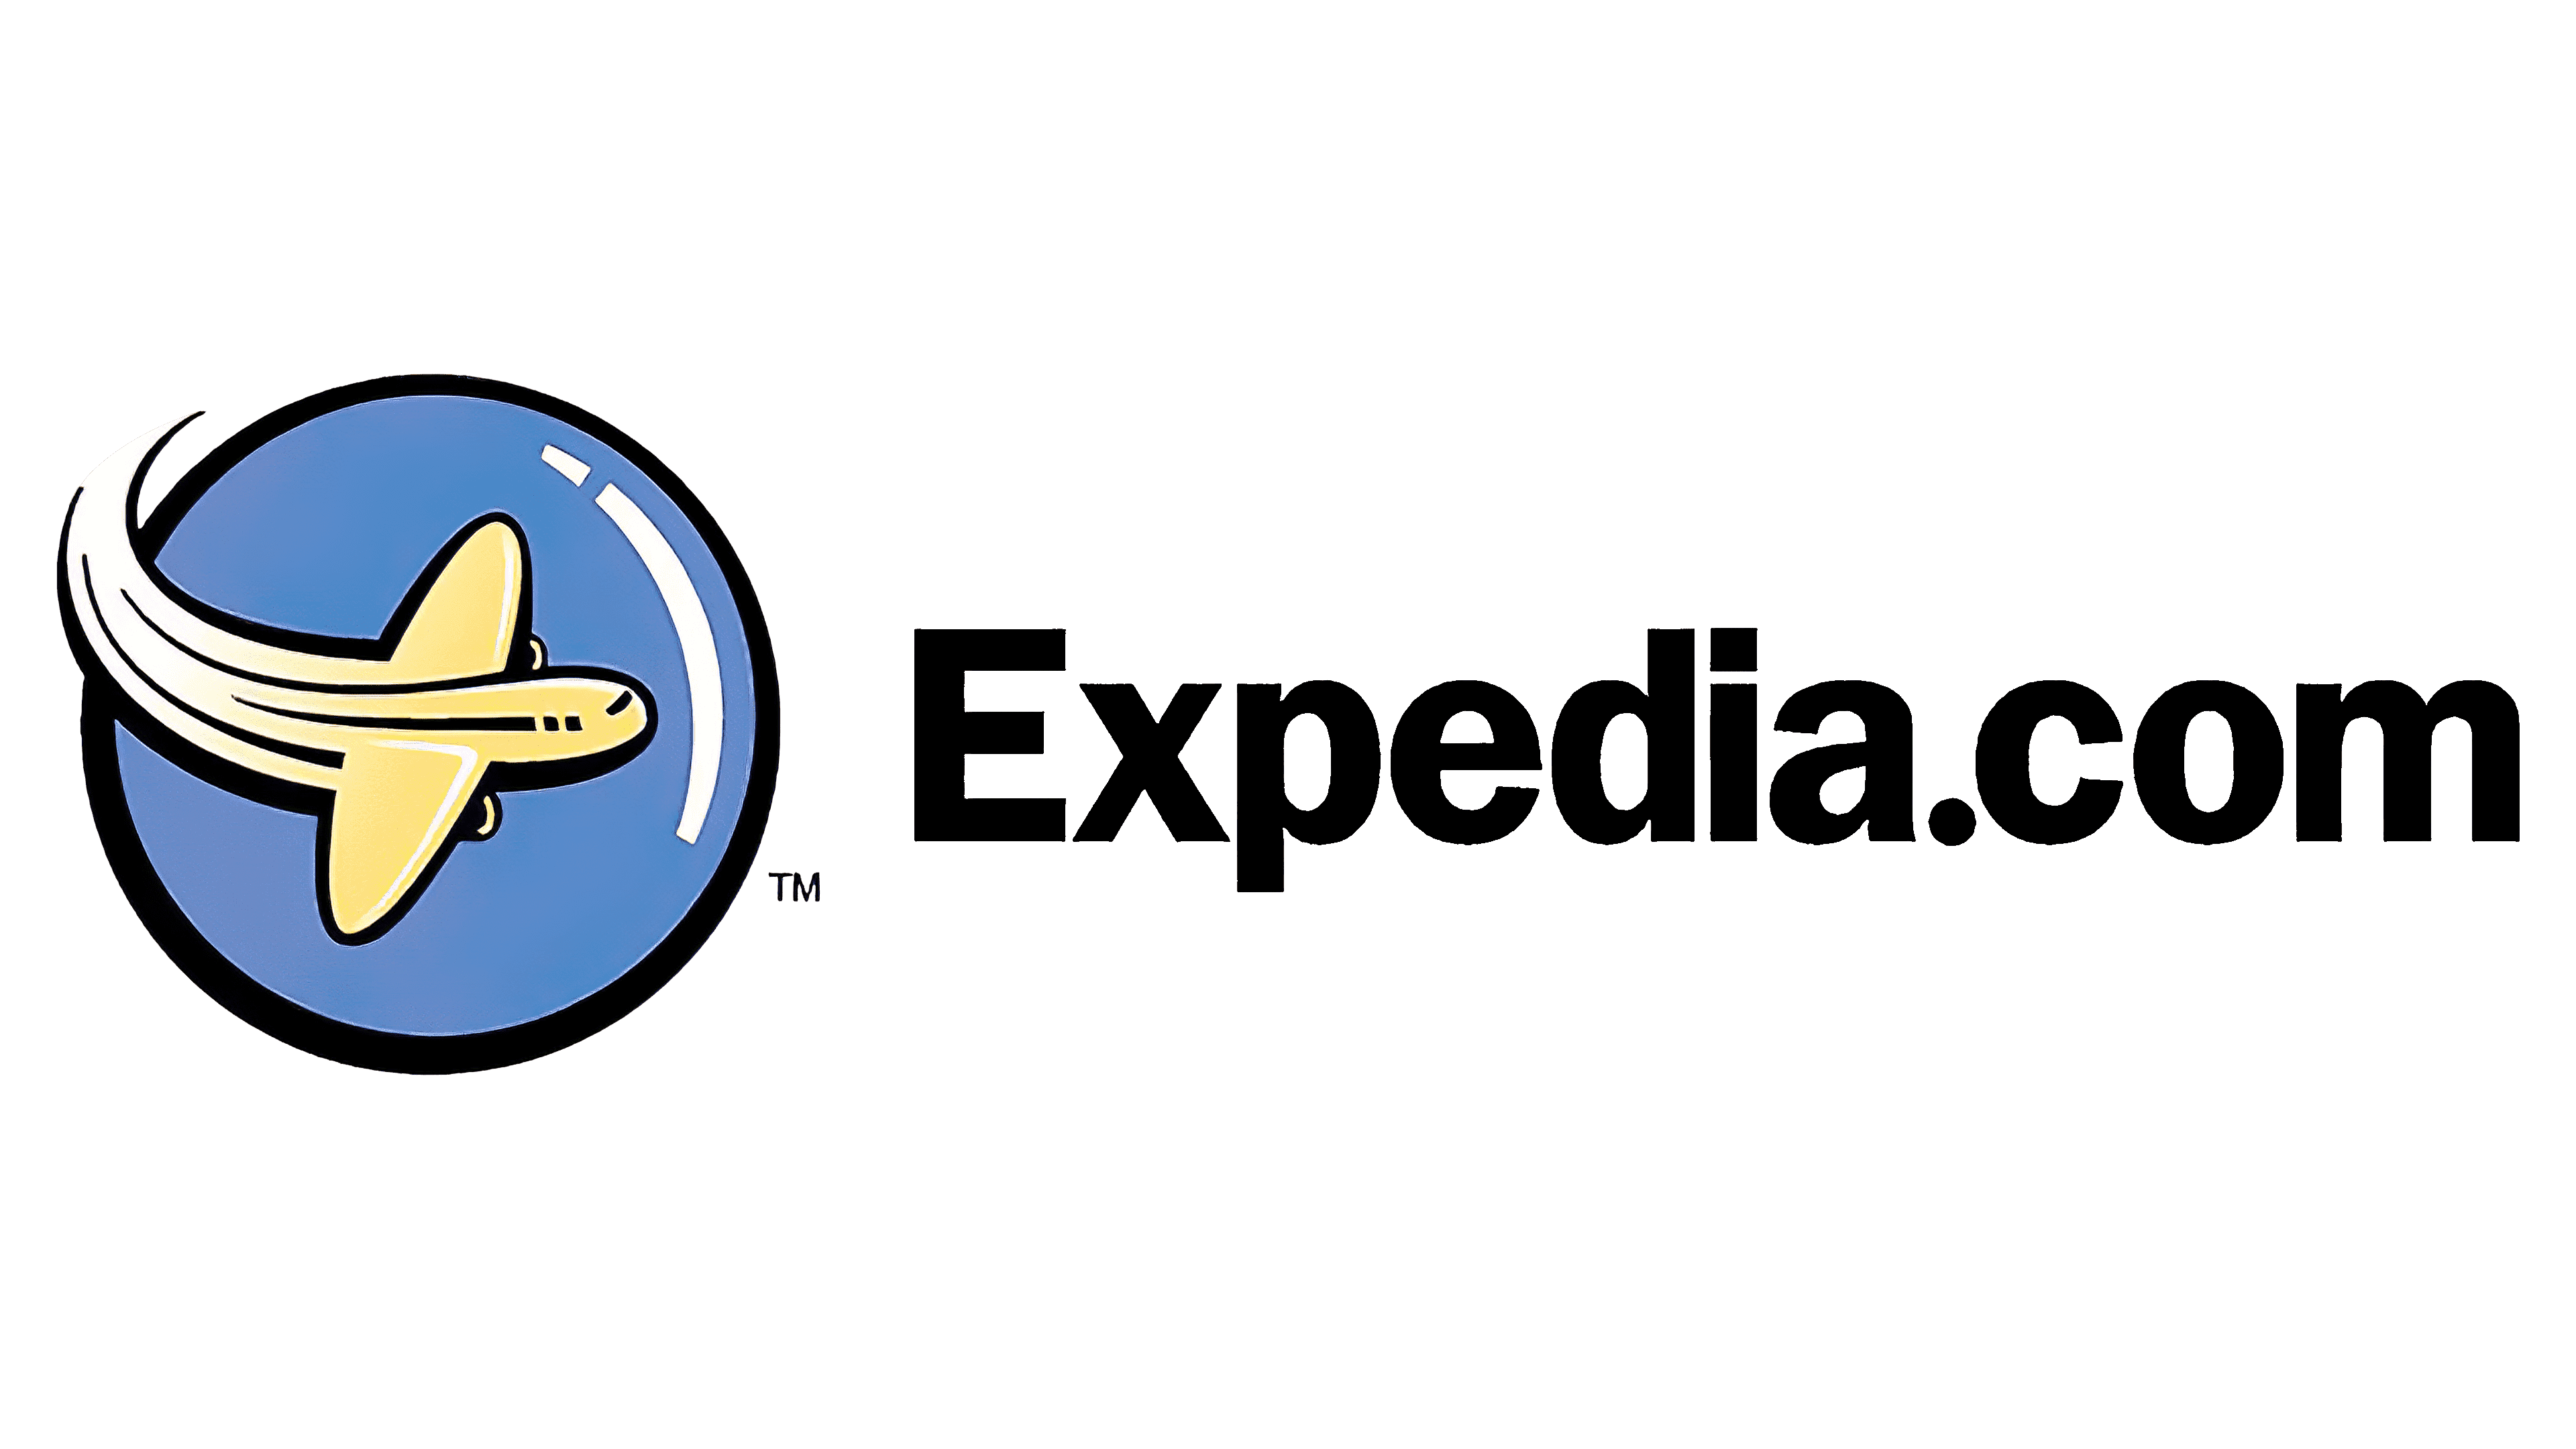 what travel brands does expedia own